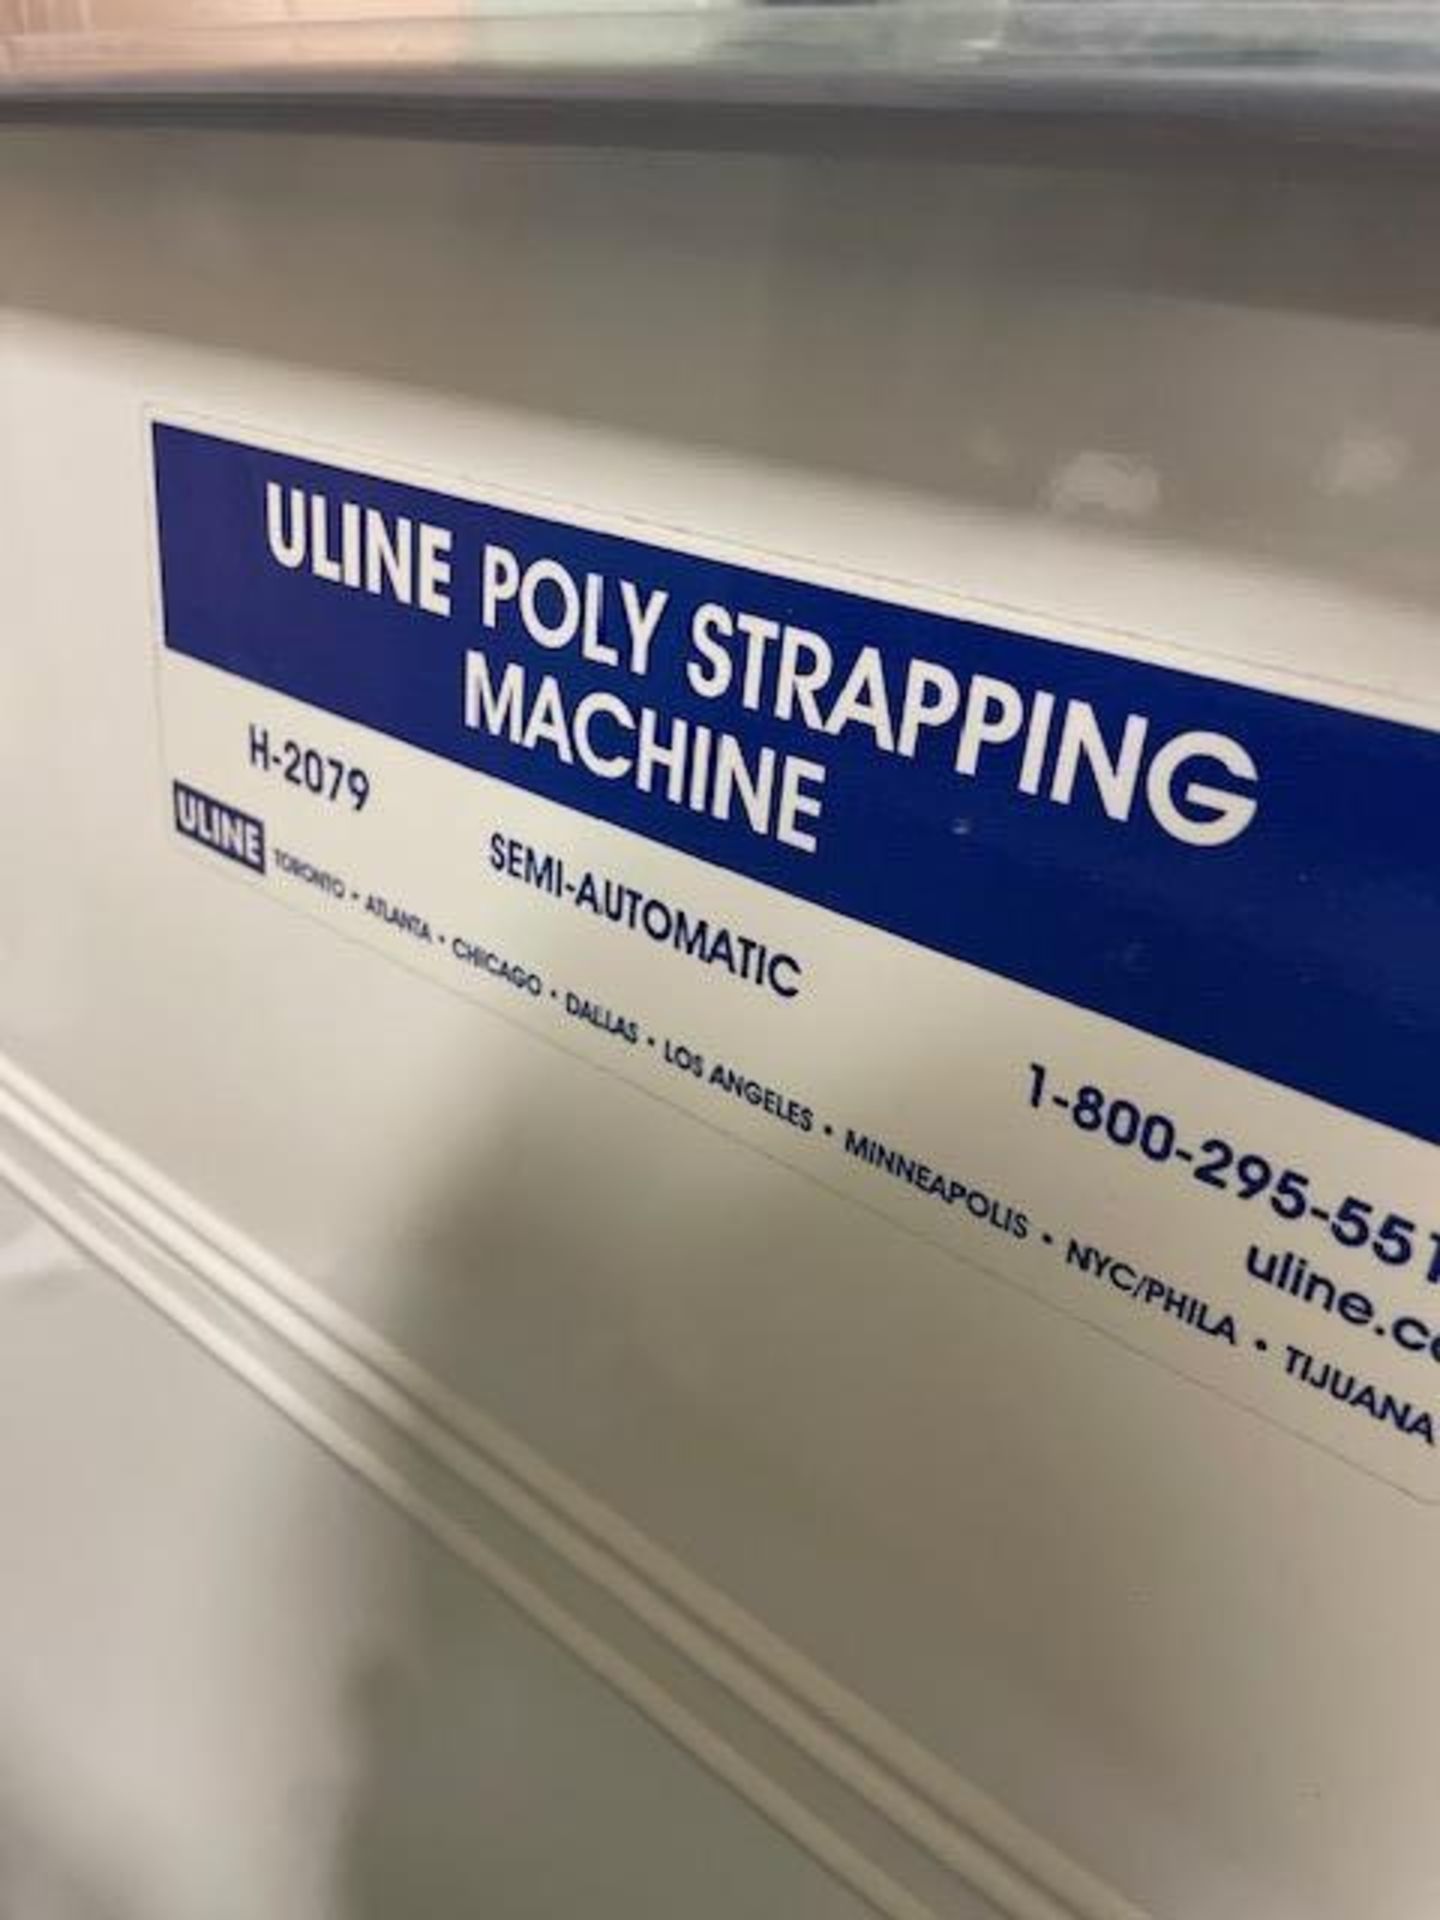 ULINE "H-2079" Poly Strapping Unit, S/N: 1603228667 (North York Facility) - Image 2 of 4